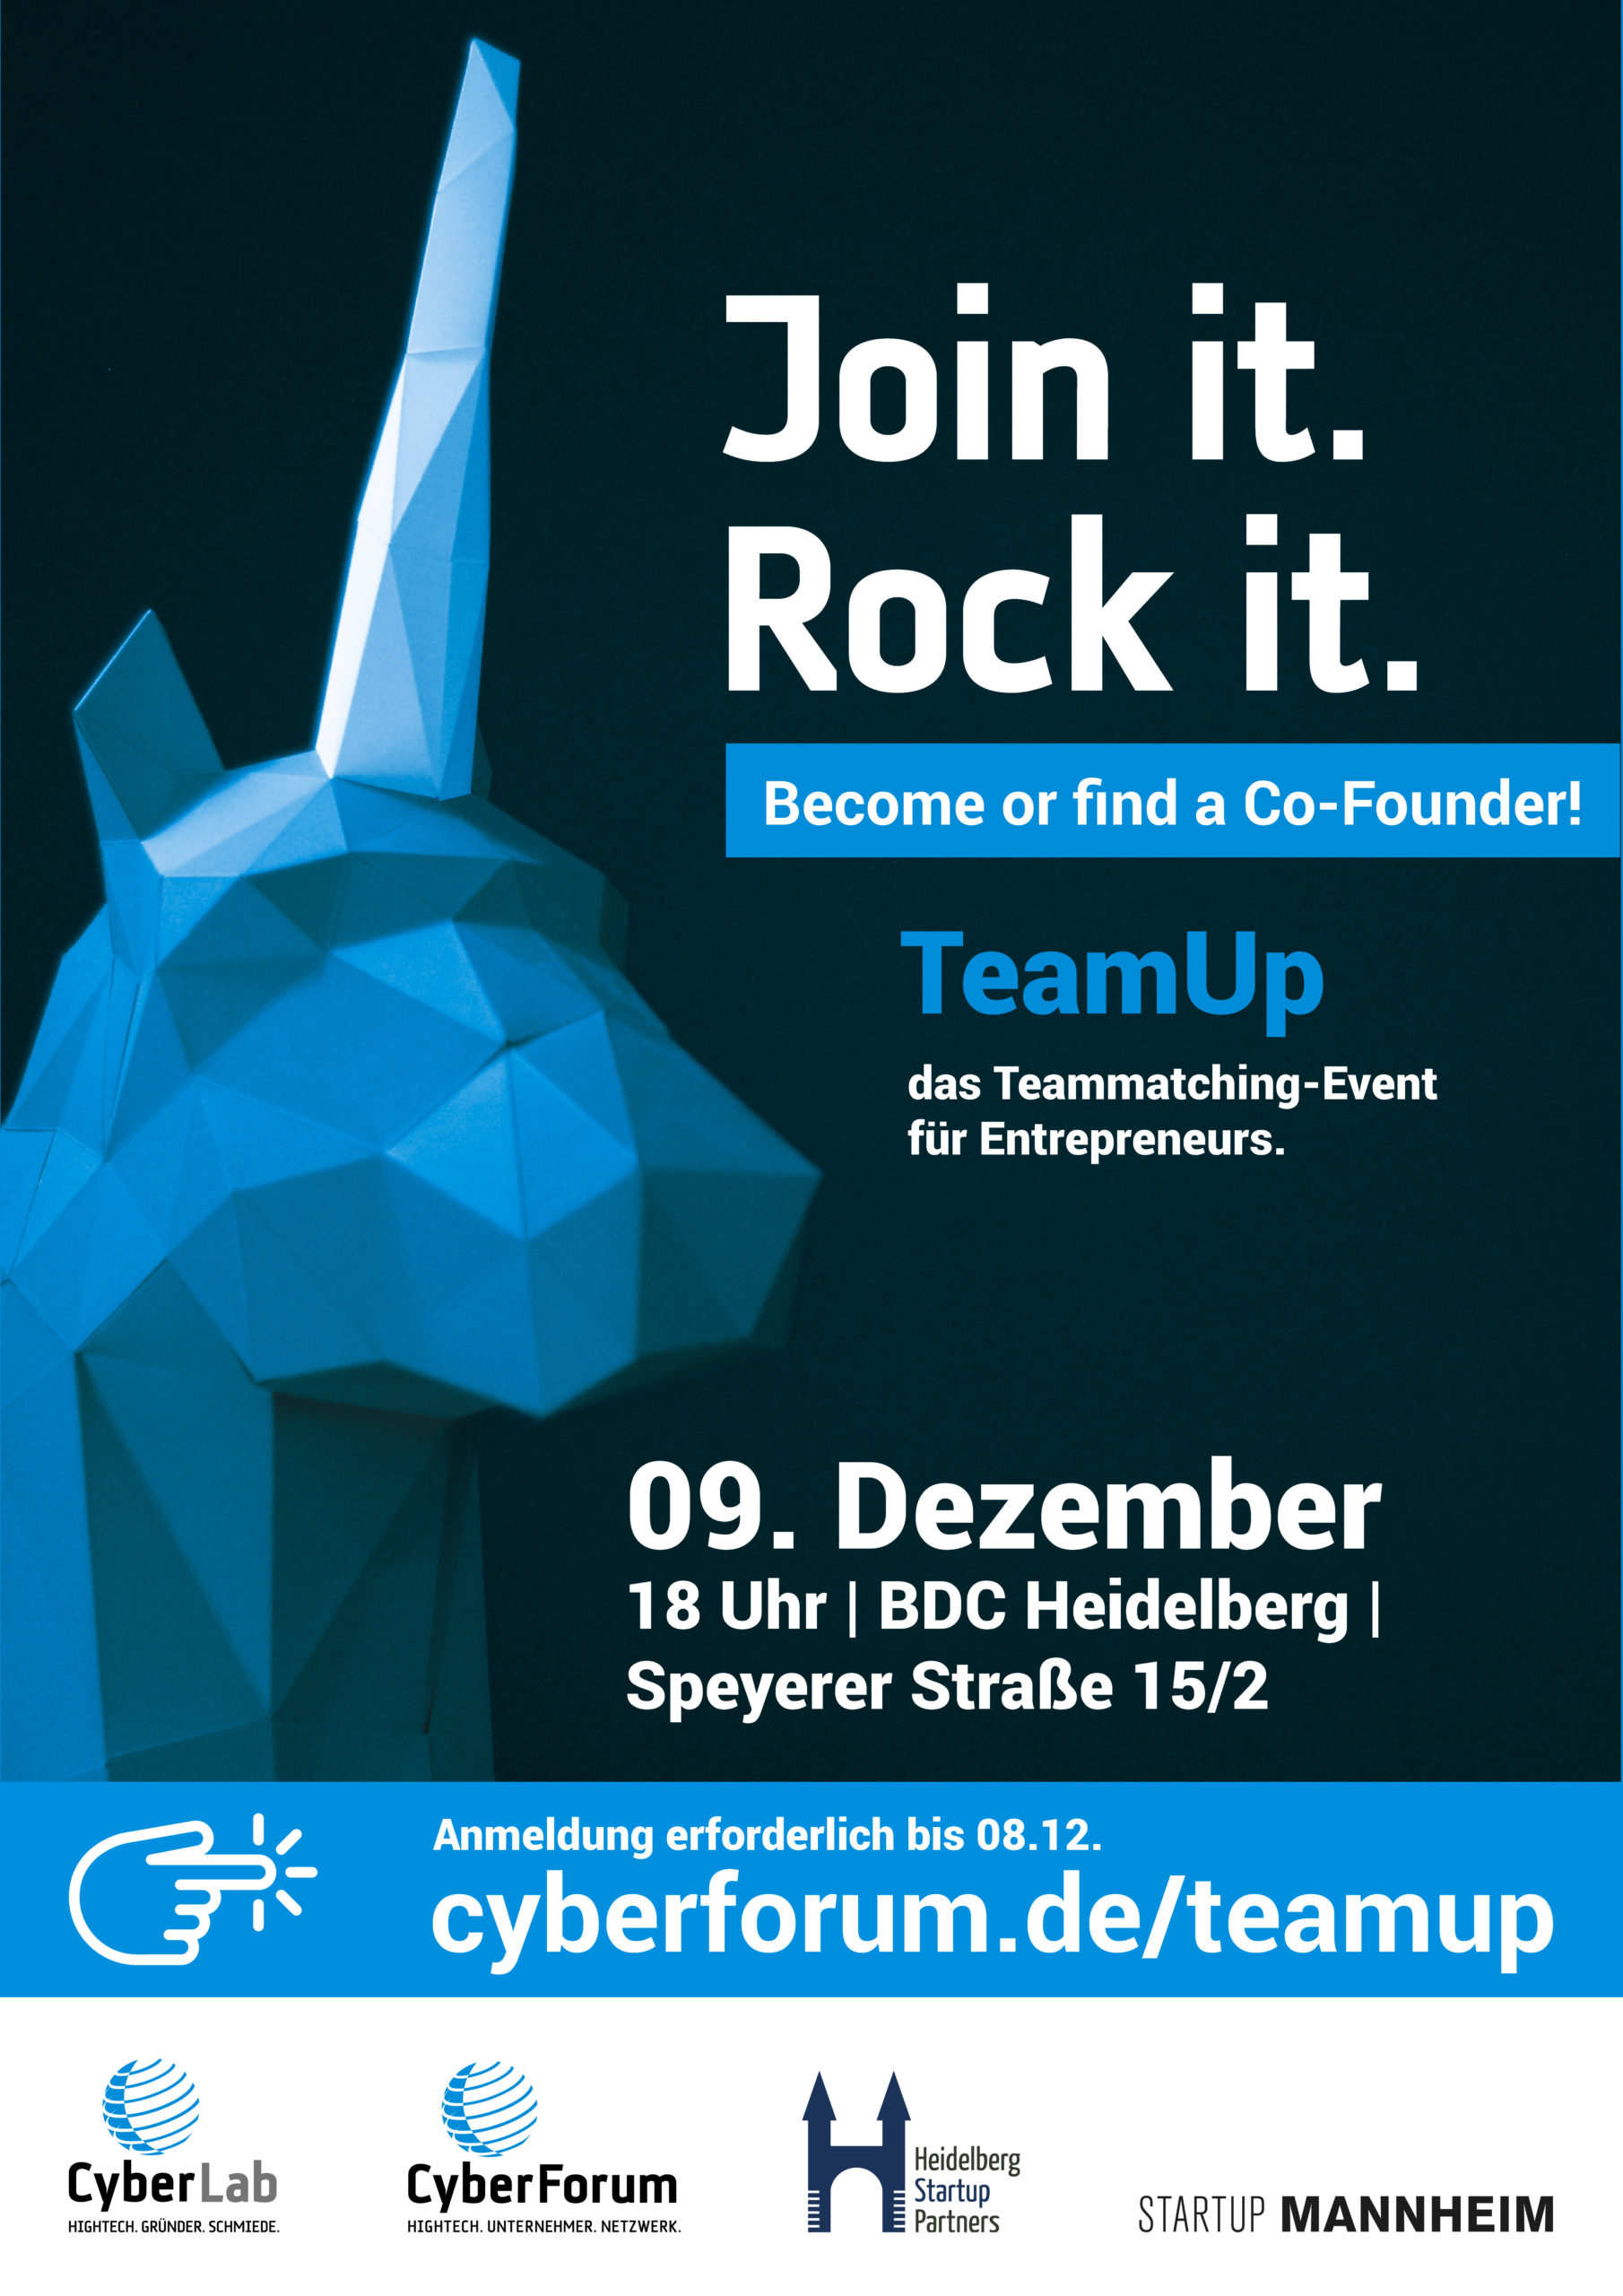 TeamUp - become or find a Co-Founder!